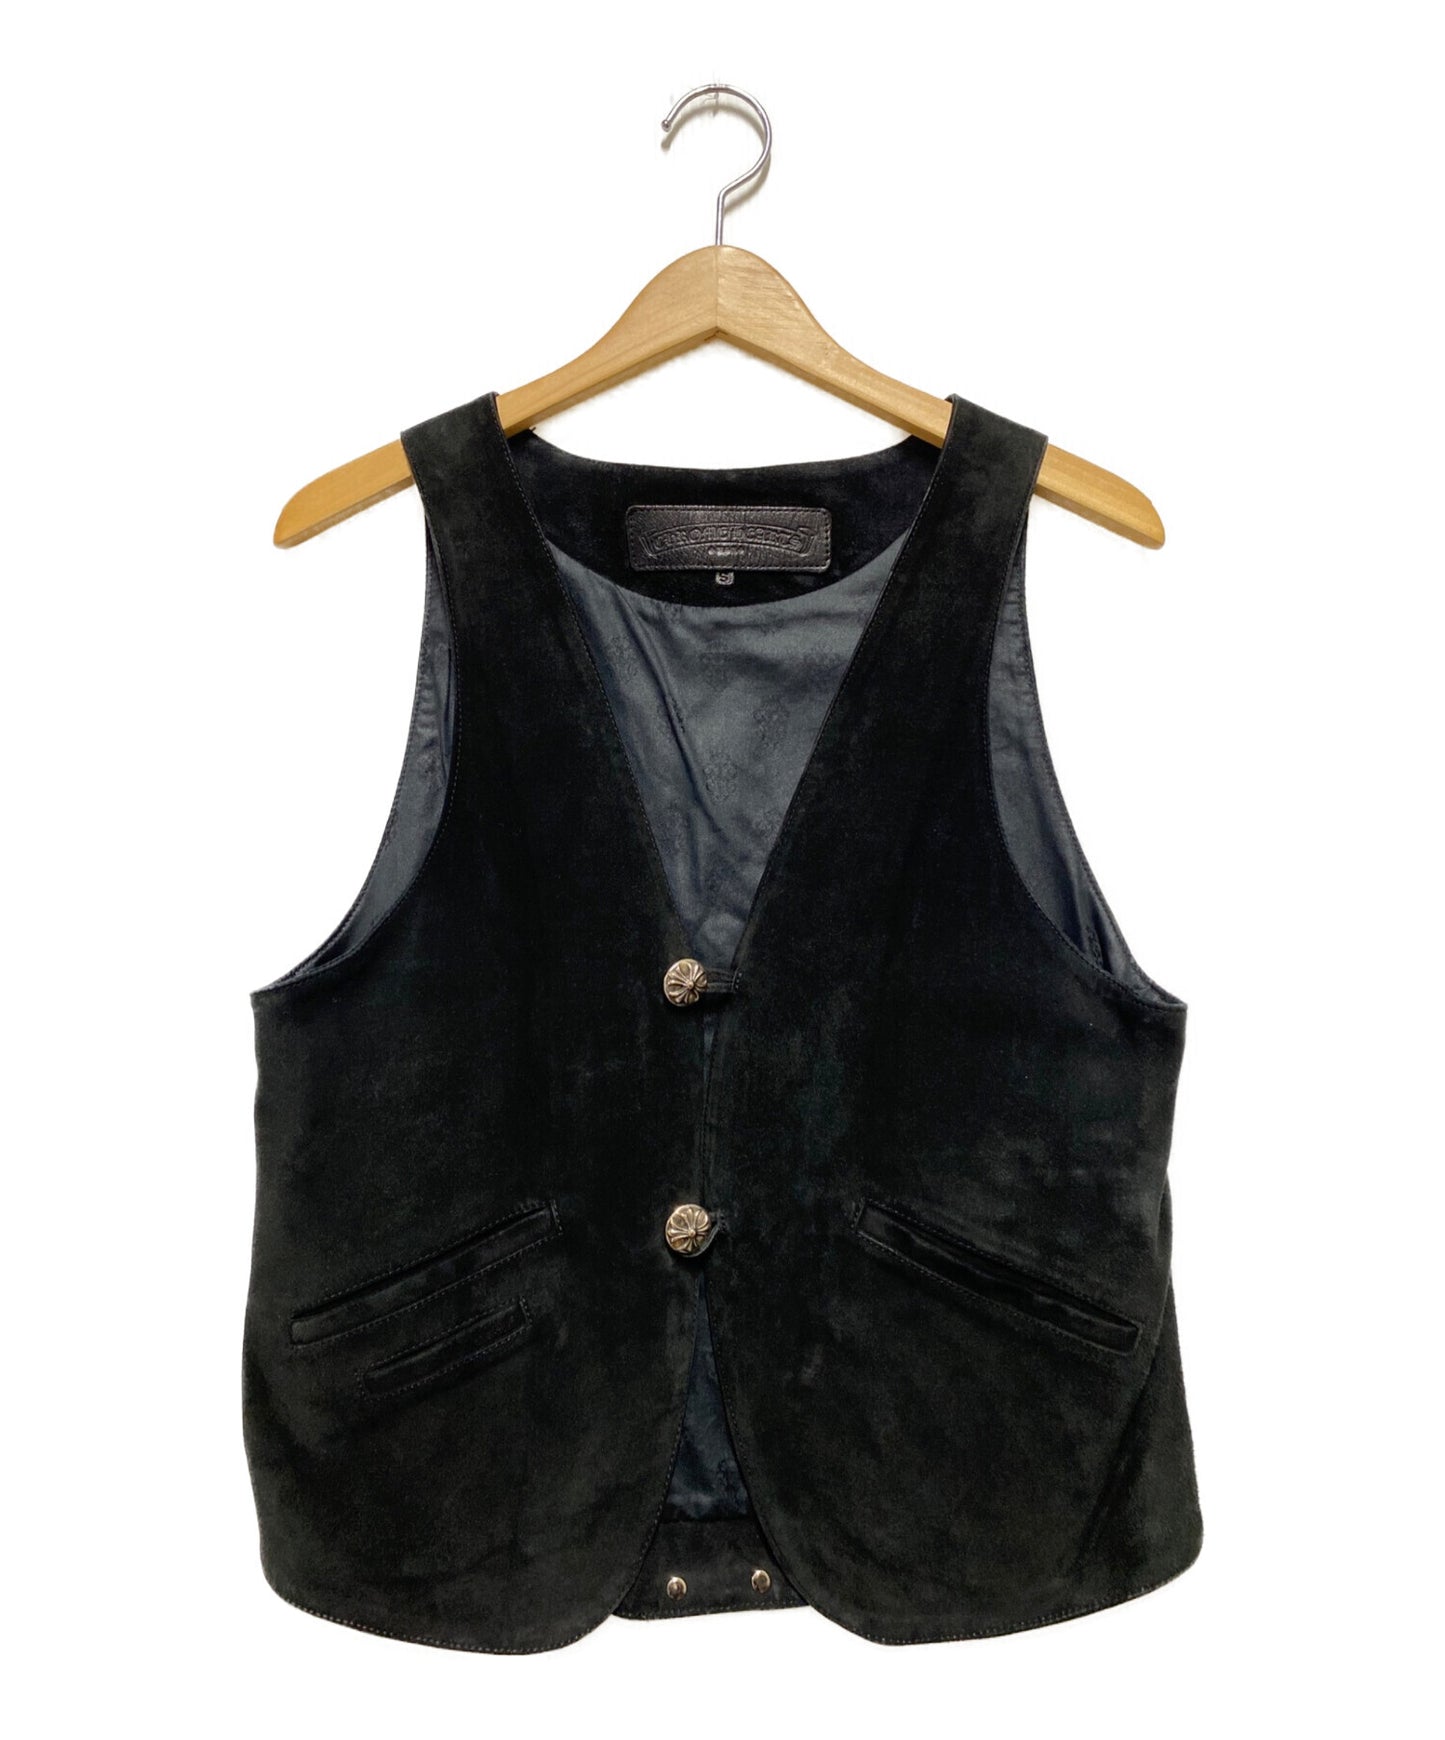 Chrome Hearts Cross-Ball Suede Suede Vest 2216-304-2001